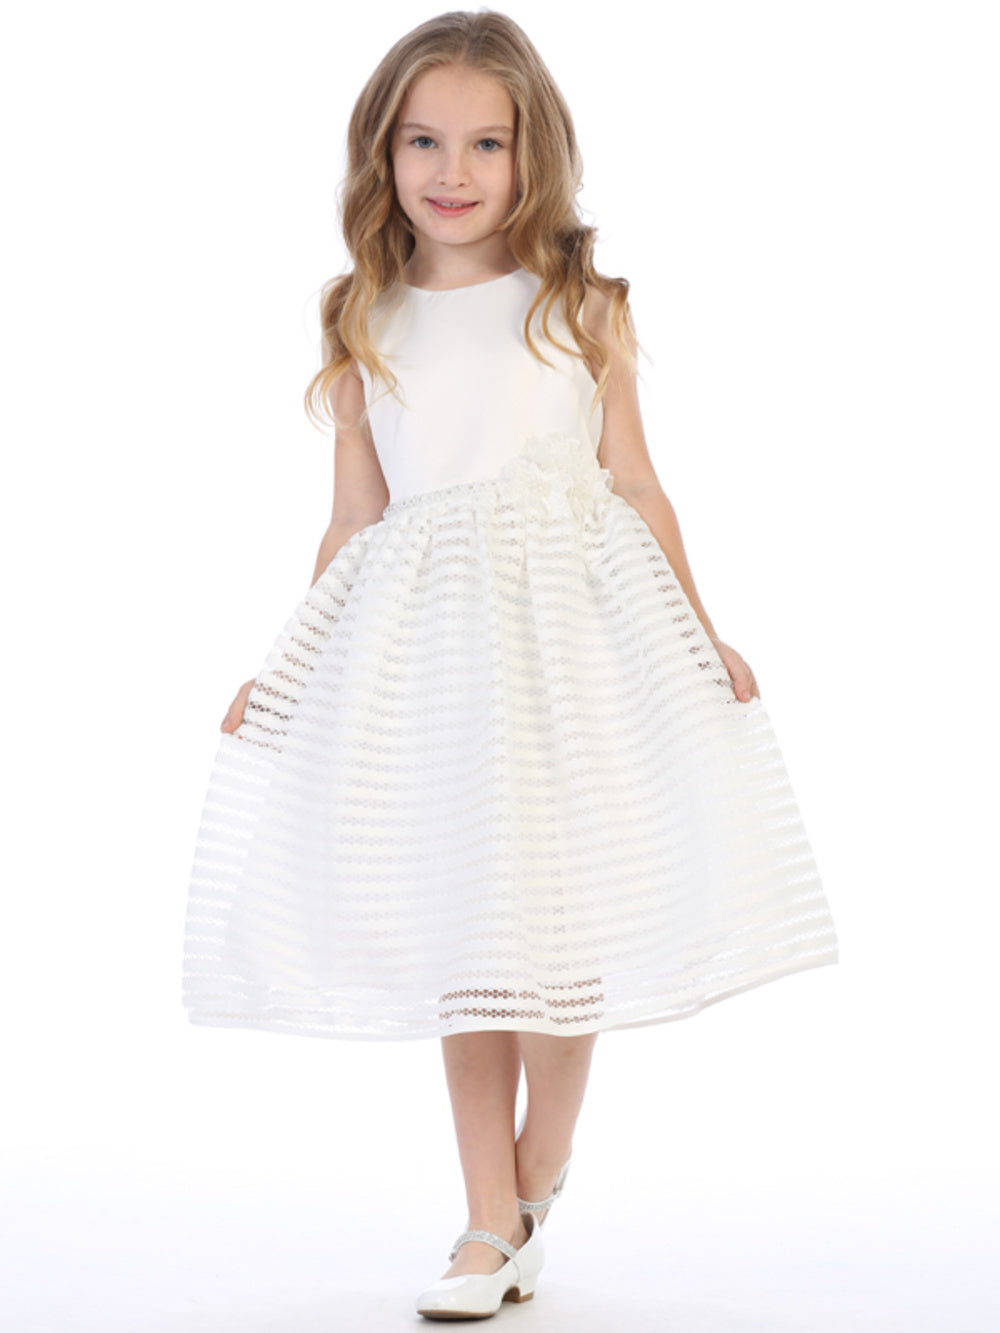 Flower girl shines in the (11) ivory dress adorned with a stylish bolero.